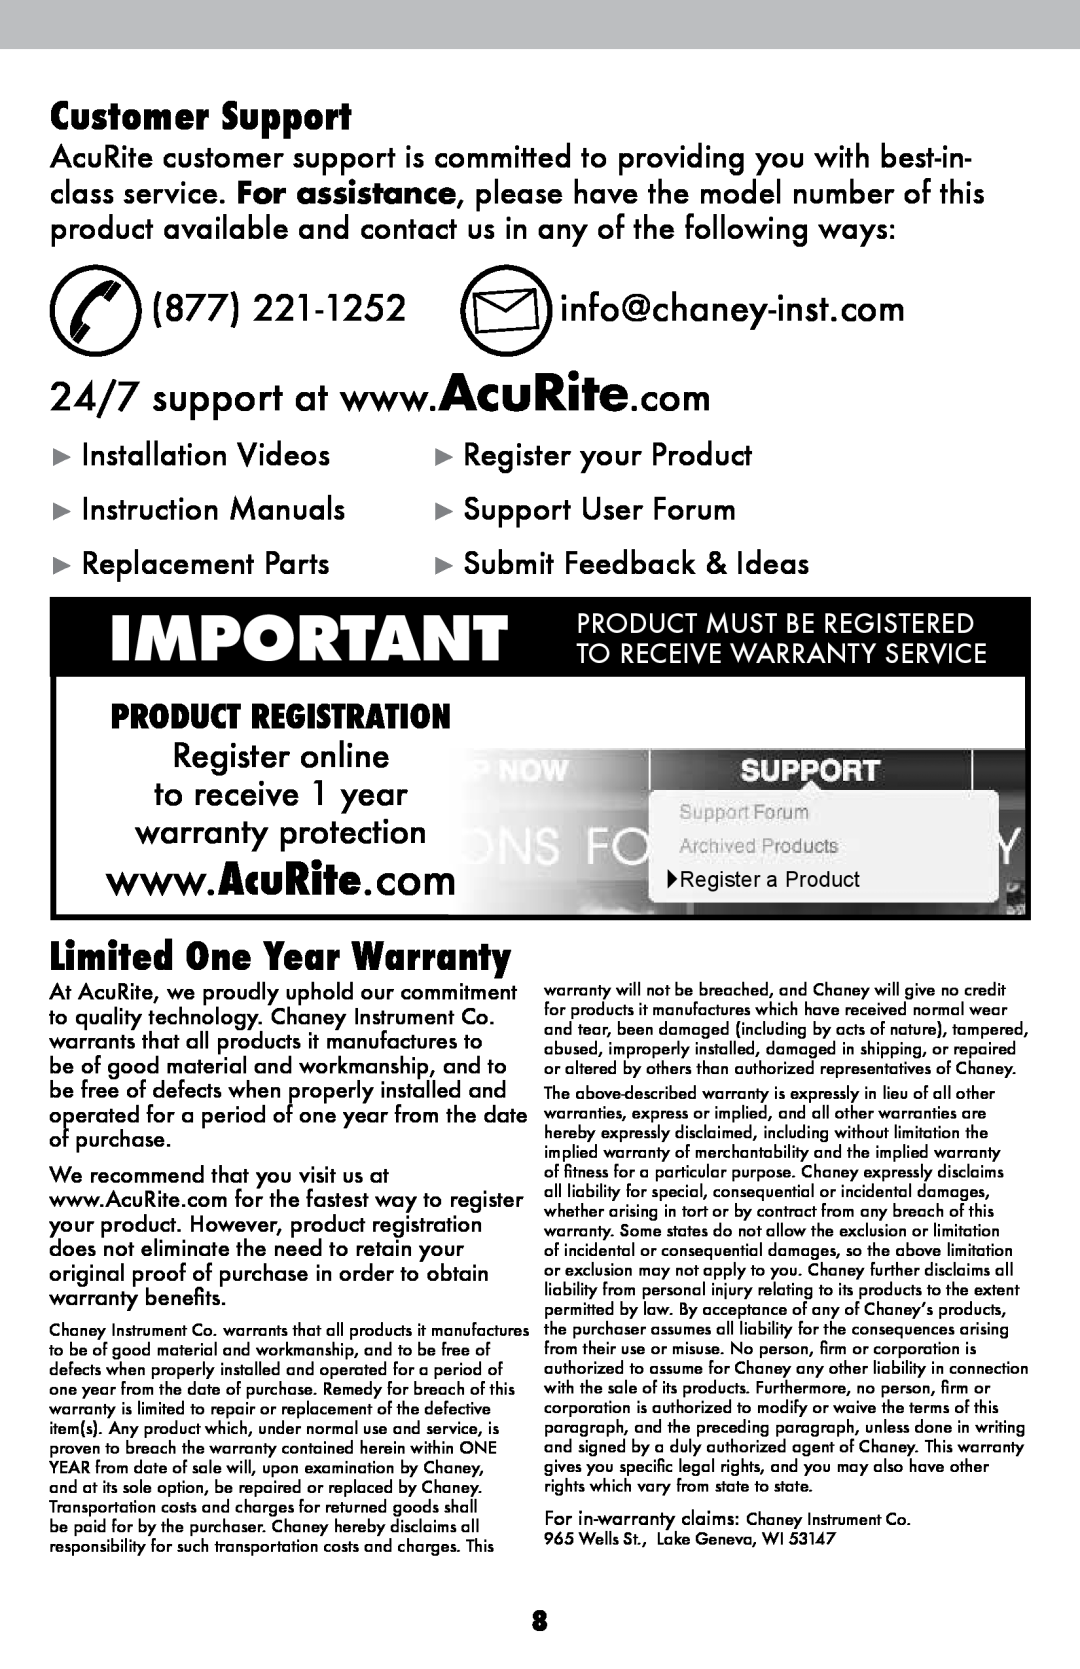 Acu-Rite 424, 522 Customer Support, 877 221-1252 info@chaney-inst.com, Limited One Year Warranty, Register online 